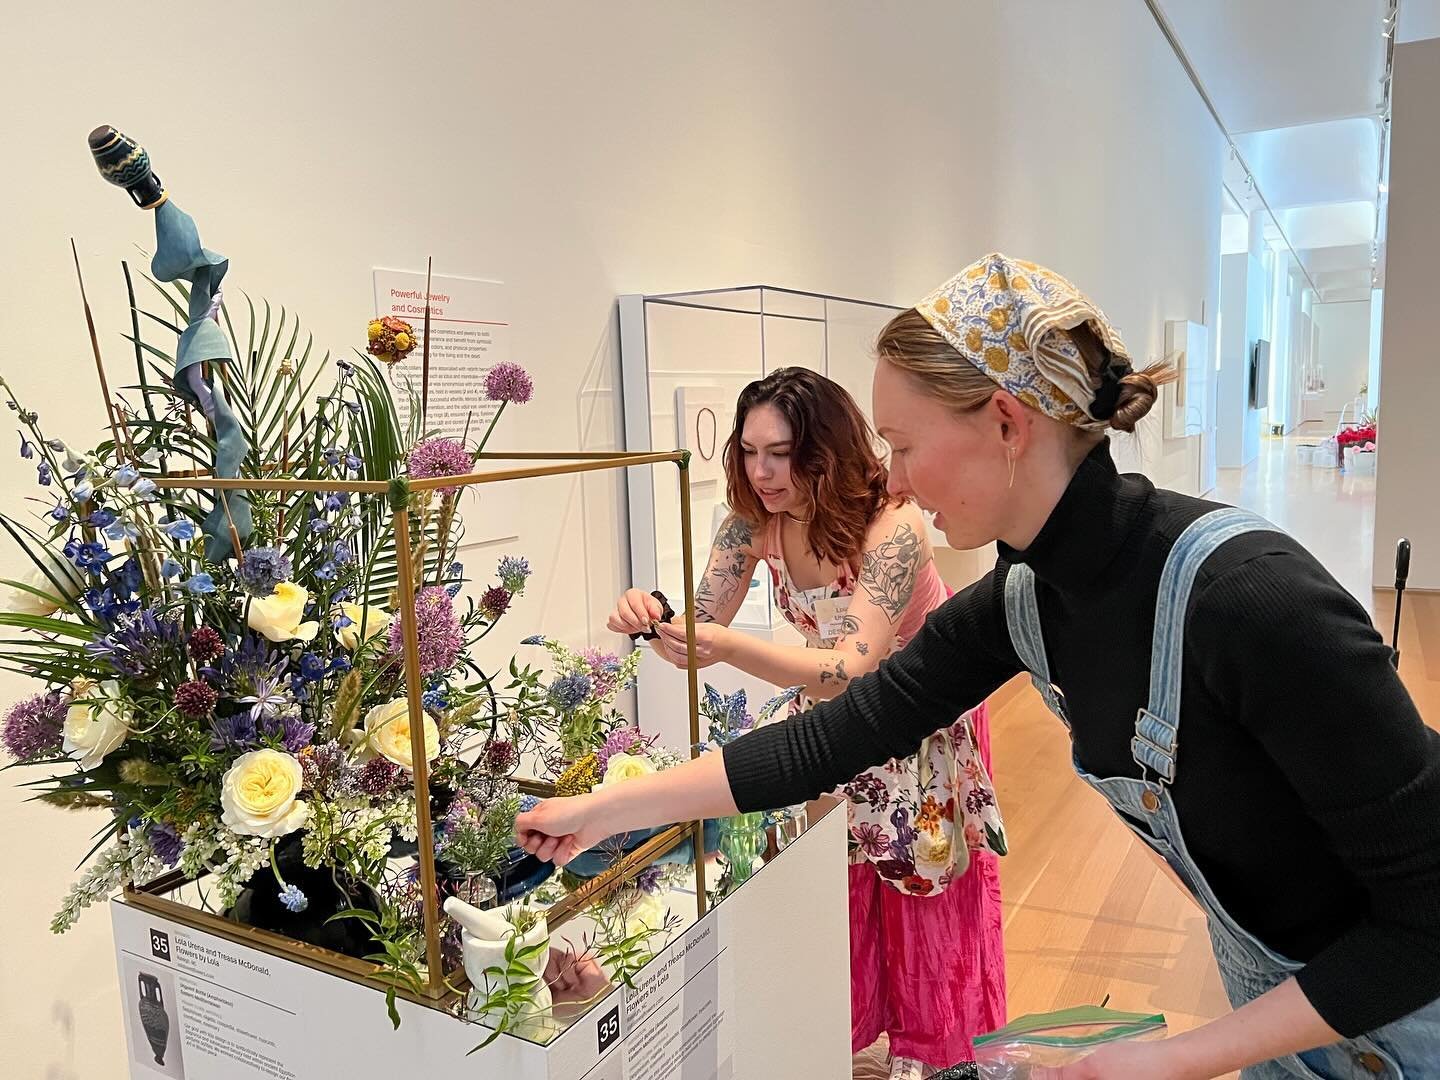 very in-my-element / in my happy place today 🥰

#artinbloom2024 #artinbloom #ncmaartinbloom #ncma #ncmuseumofart #florist #floraldesign #floralart #designer #floraldesigner #artist #ncmabloom #pncartinbloom